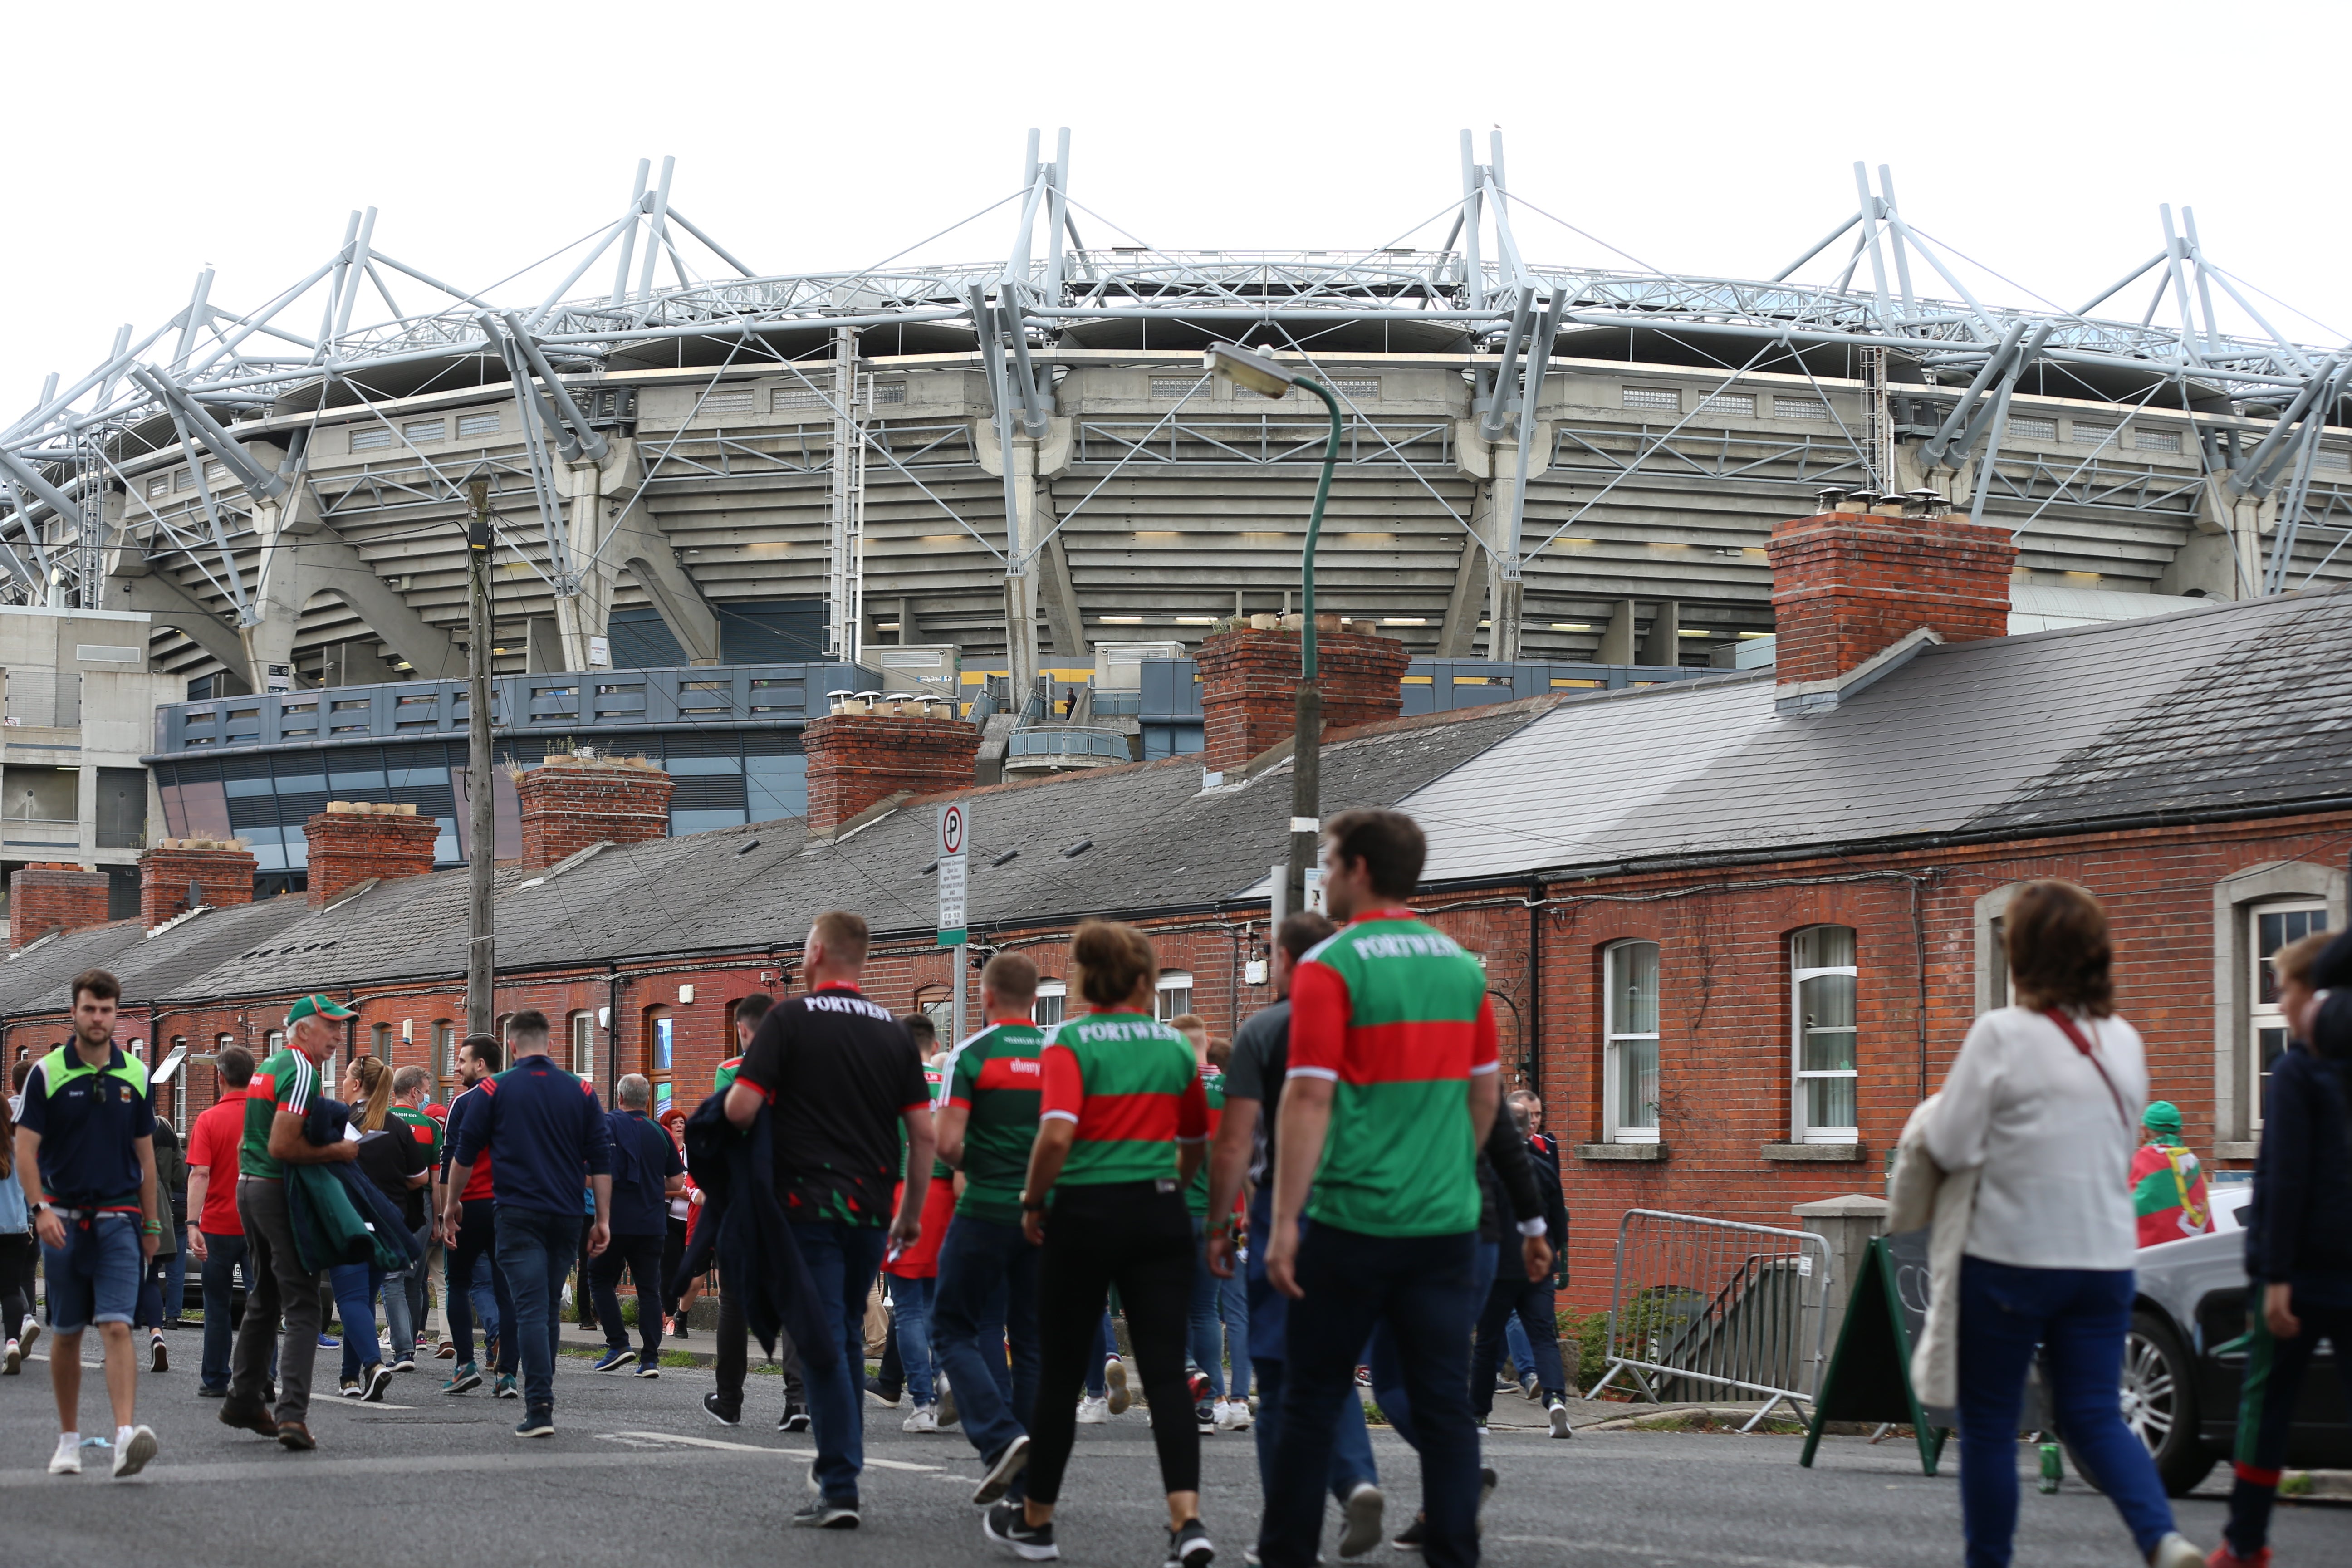 Fans arriving at Croke Park, Dublin, ahead of Tyrone taking on Mayo in the All Ireland football final (Damien Storan/PA)